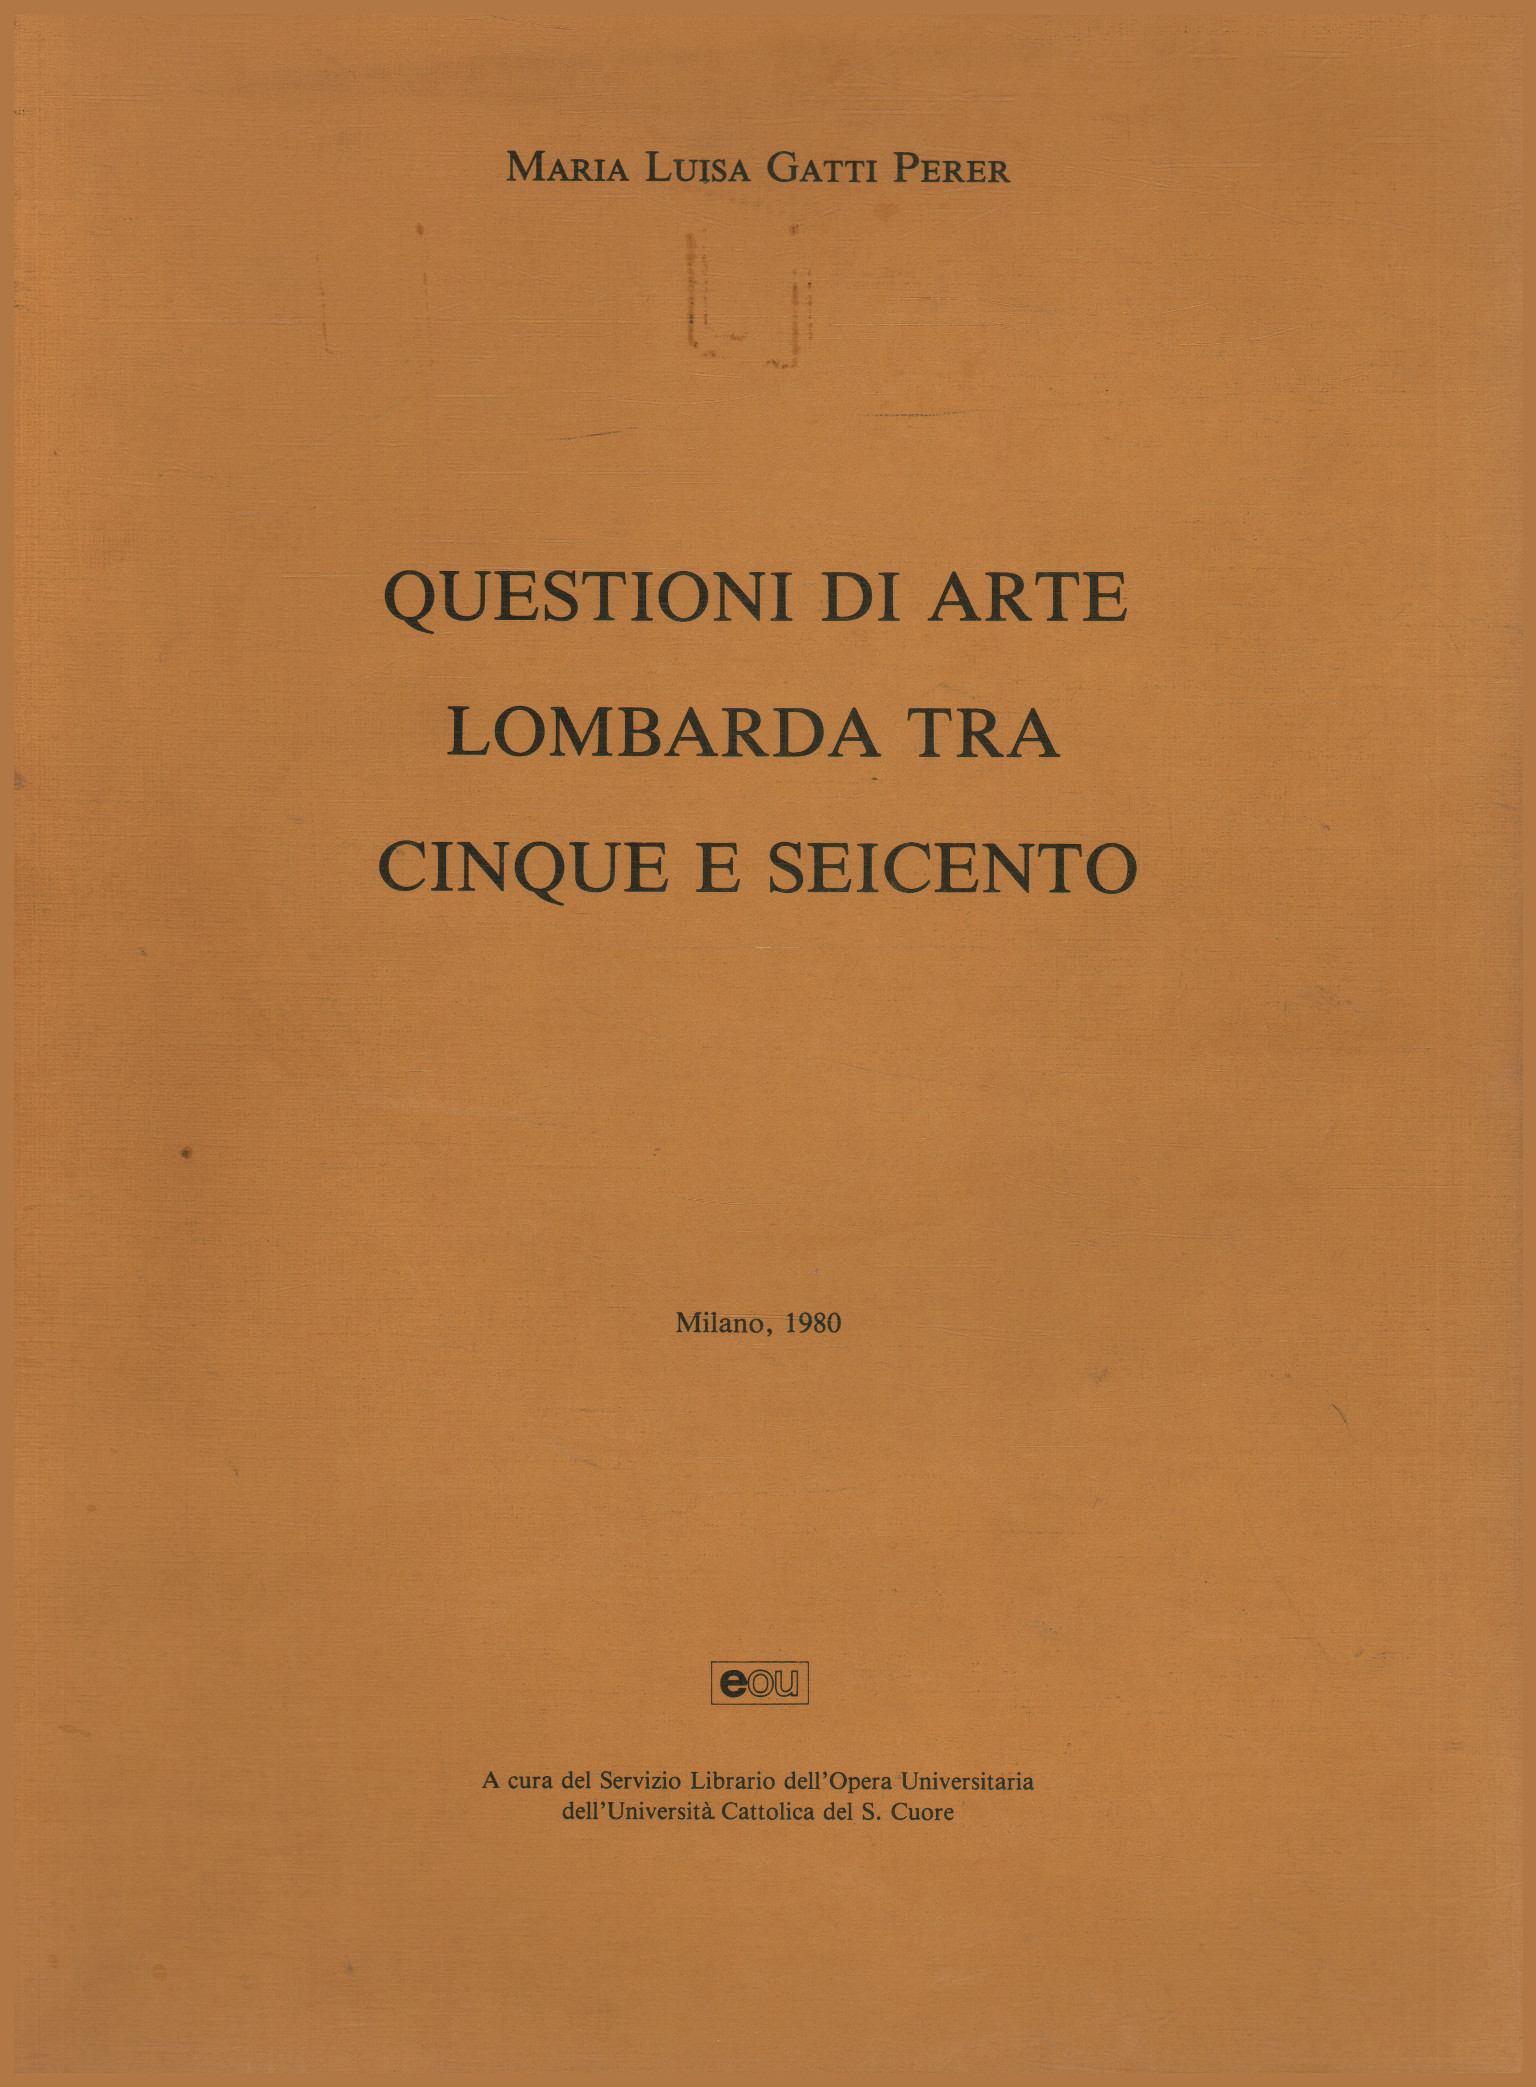 Questions of Lombard art between the sixteenth and seventeenth centuries, Maria Luisa Gatti Perer